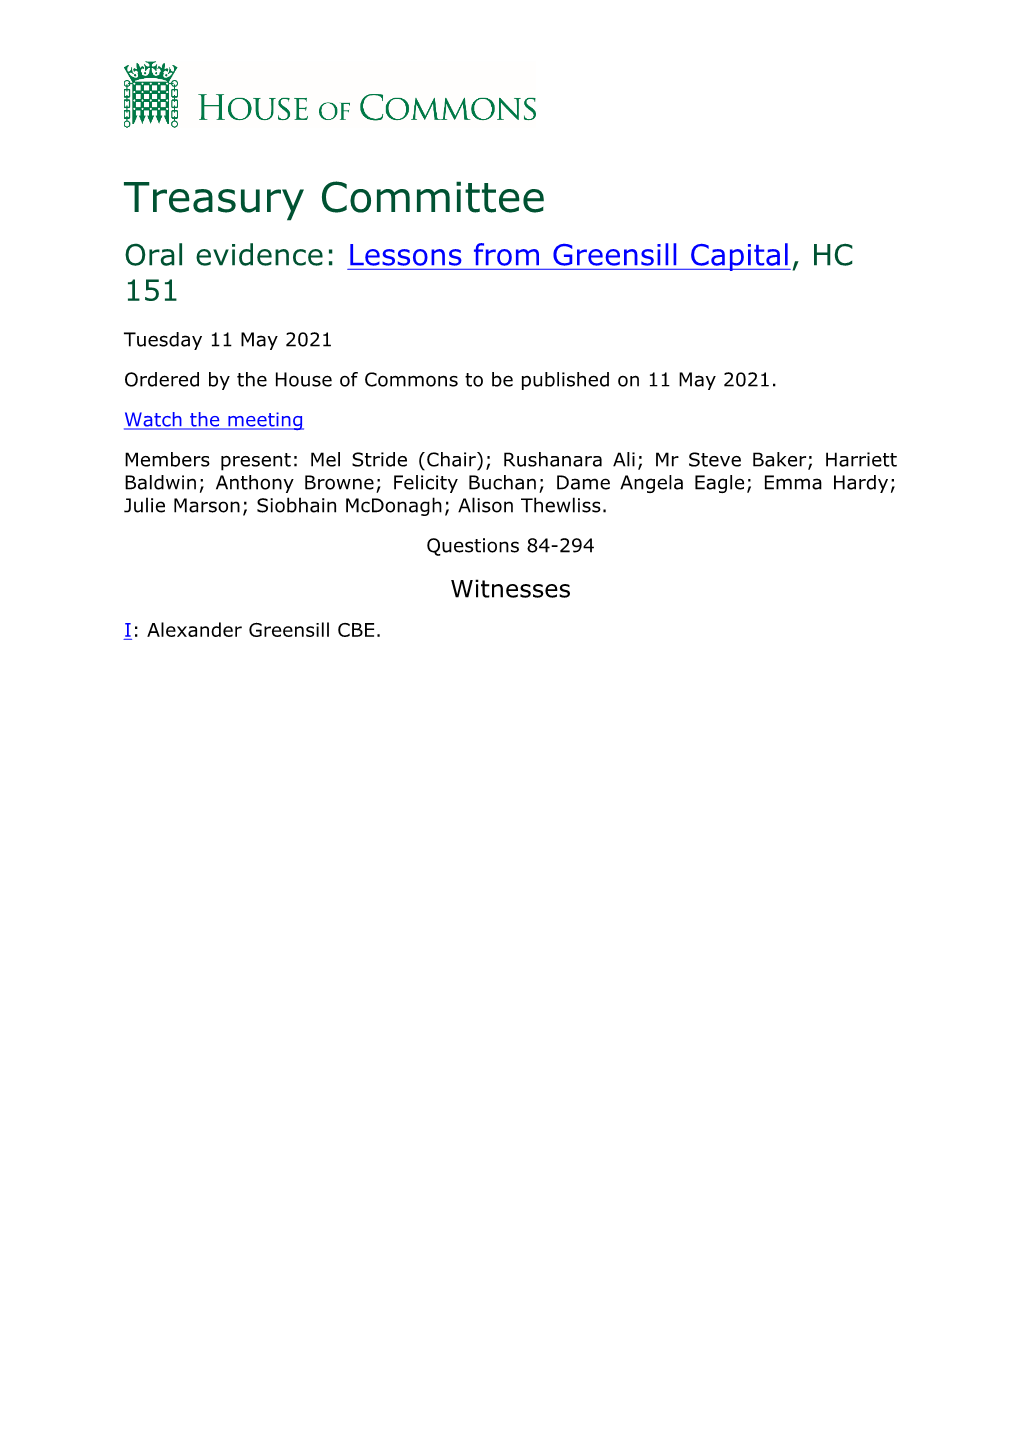 Treasury Committee Oral Evidence: Lessons from Greensill Capital, HC 151